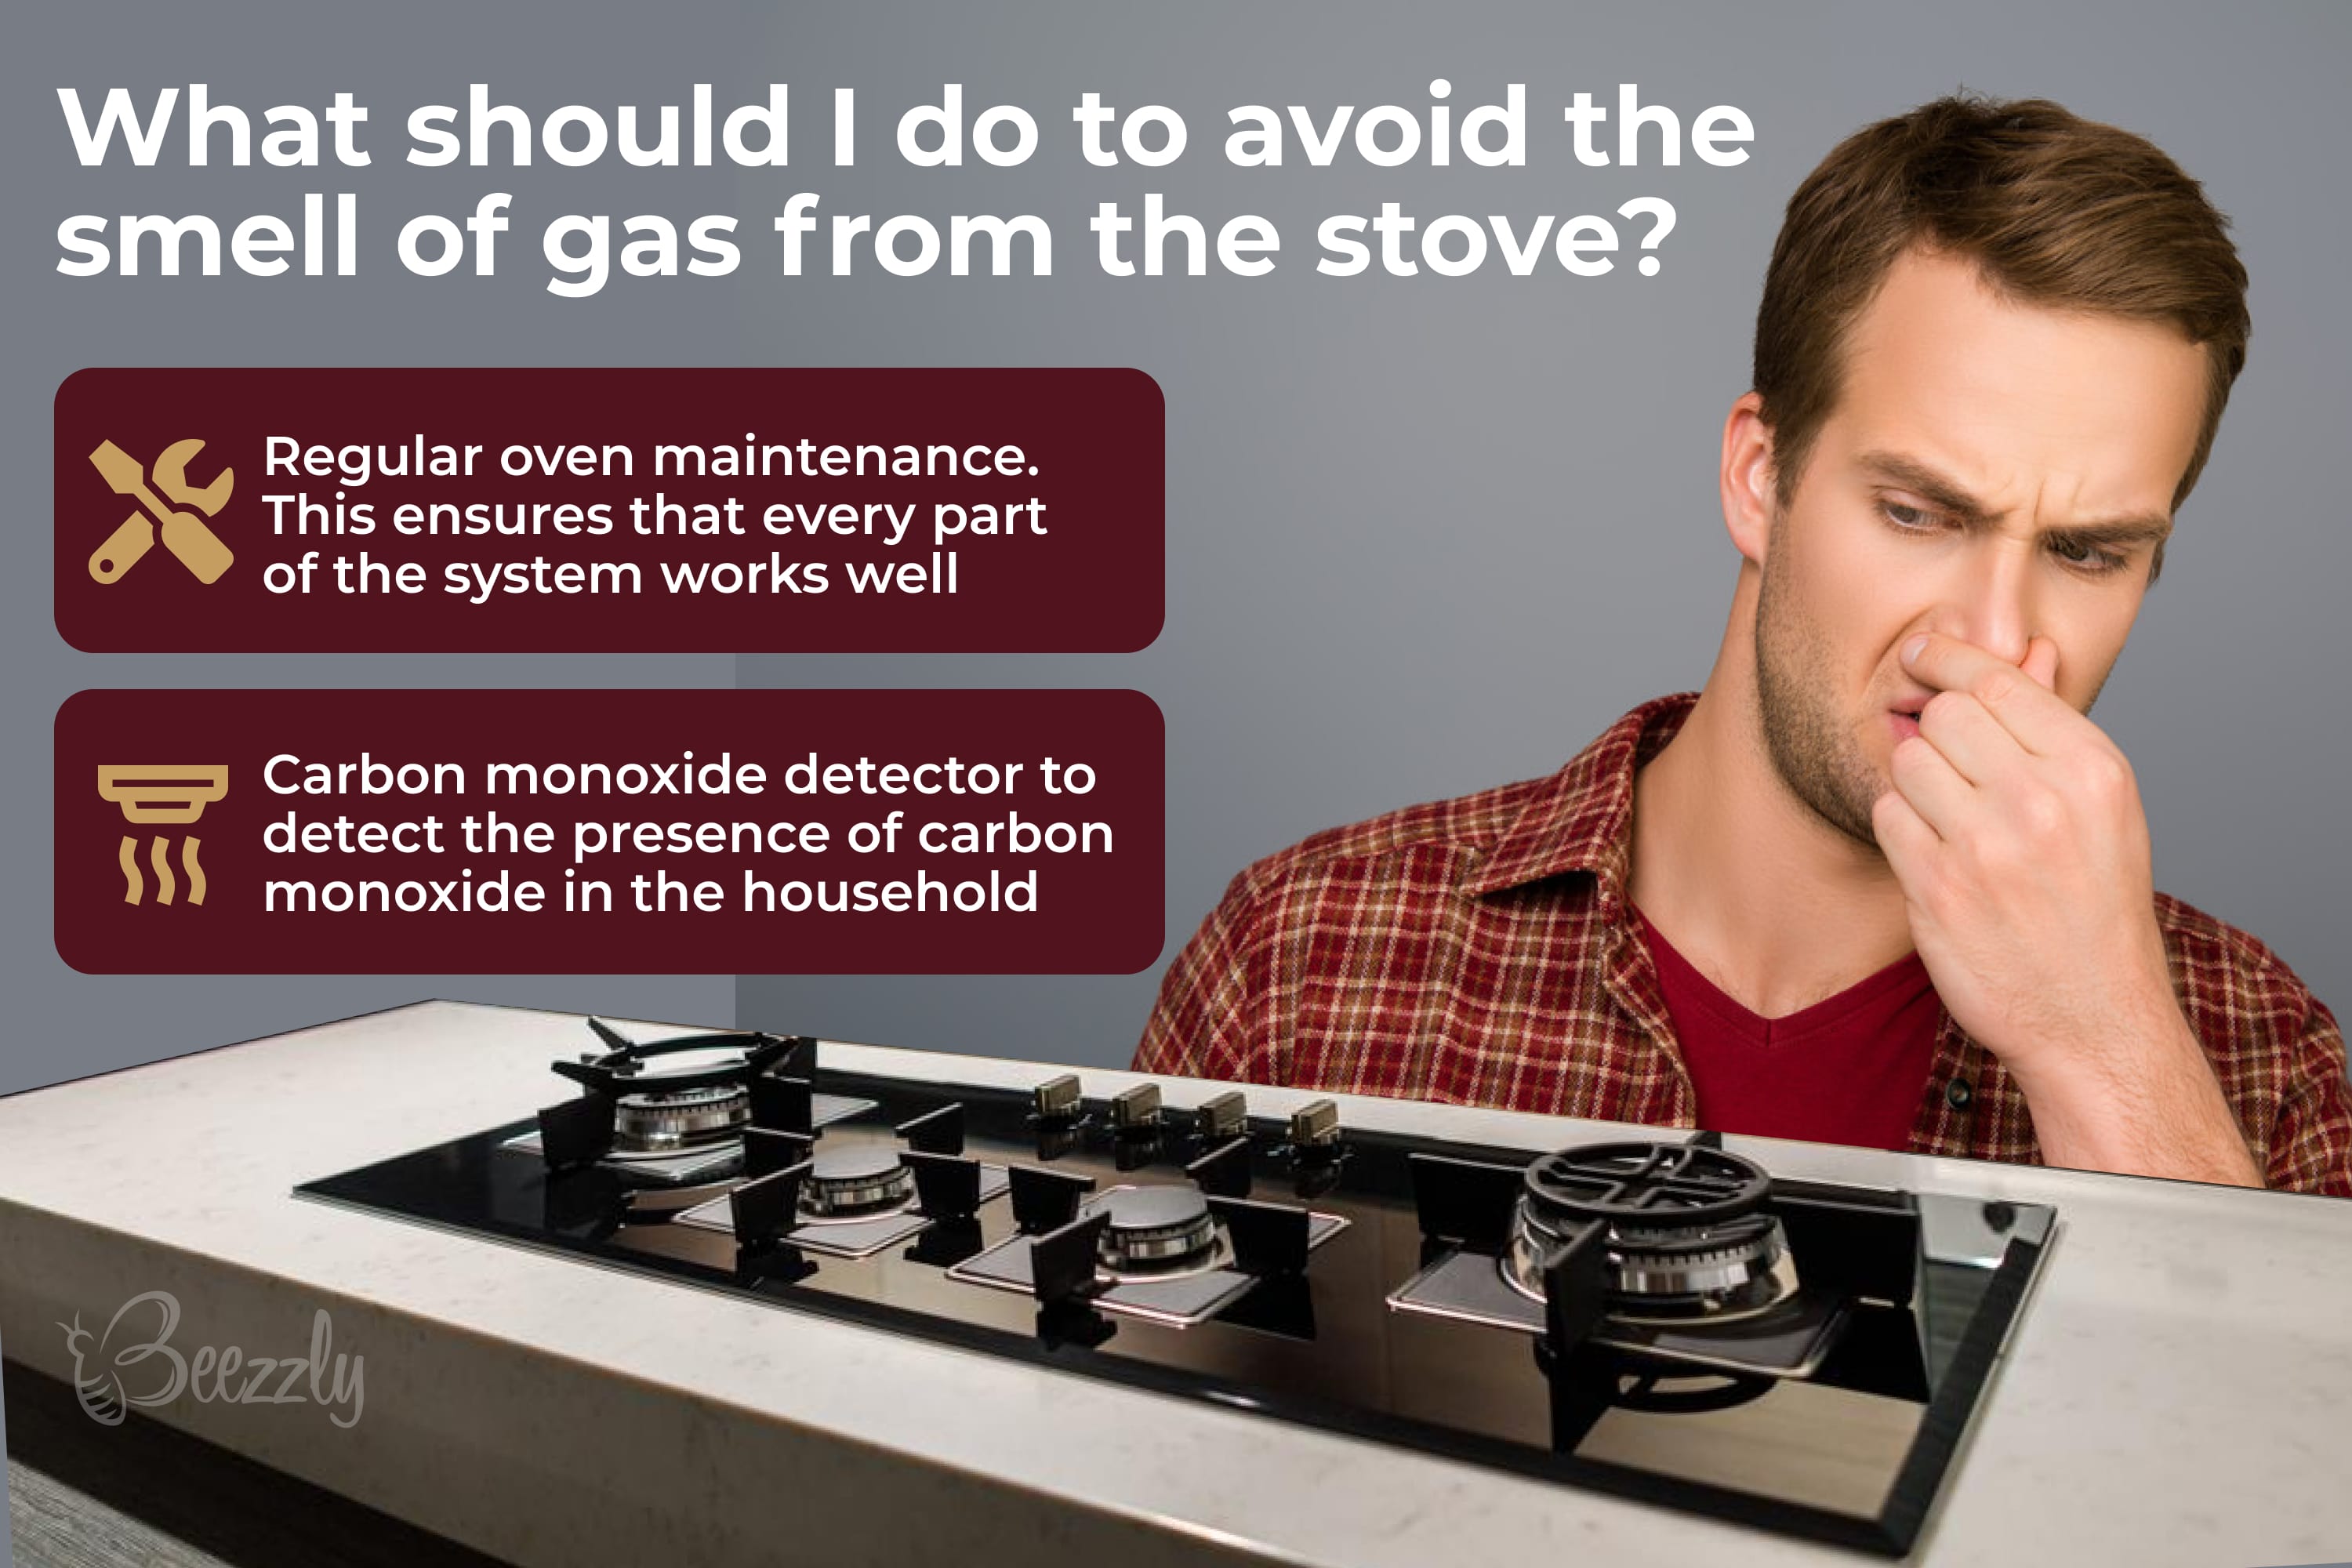 What should I do to avoid the smell of gas from the stove